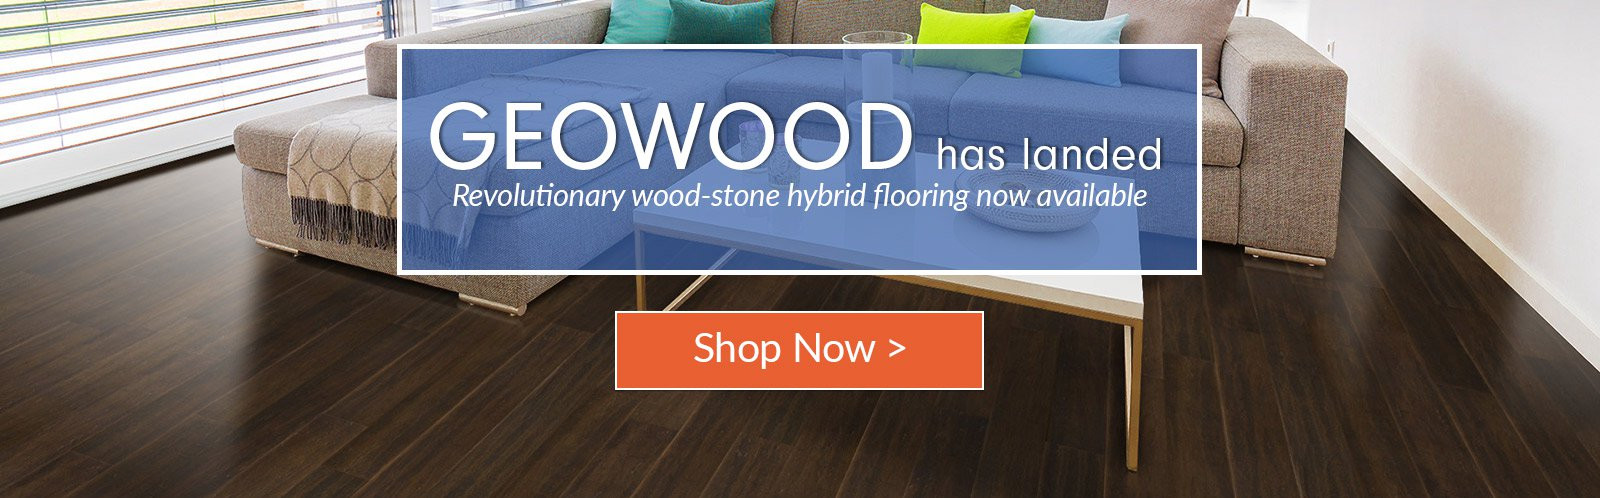 26 Stylish Hardwood or Bamboo Flooring 2023 free download hardwood or bamboo flooring of green building construction materials and home decor cali bamboo regarding geowood launch homepage slider